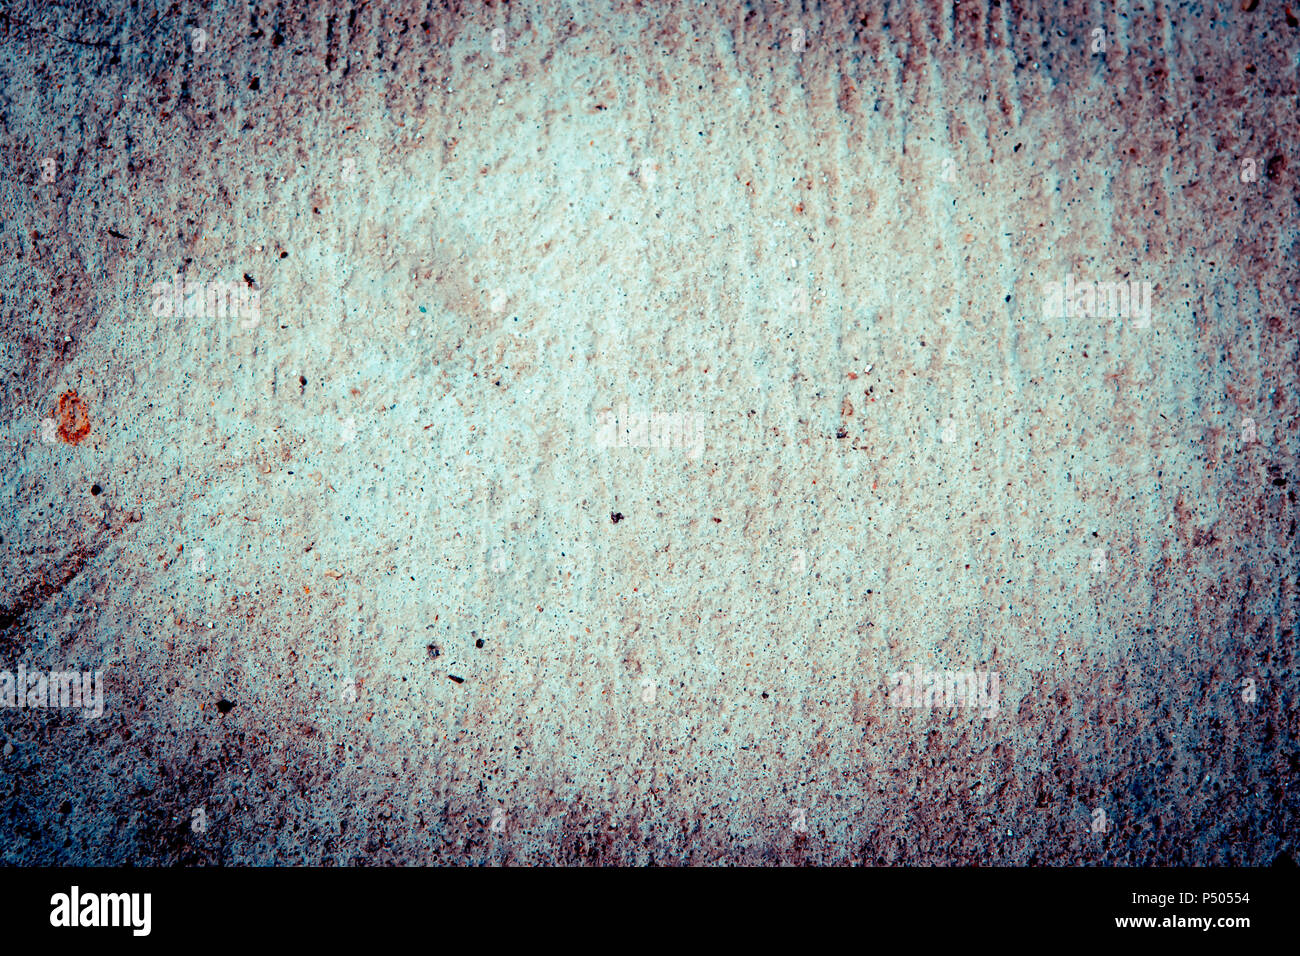 abstract simple background dark concrete filter with frame Stock Photo